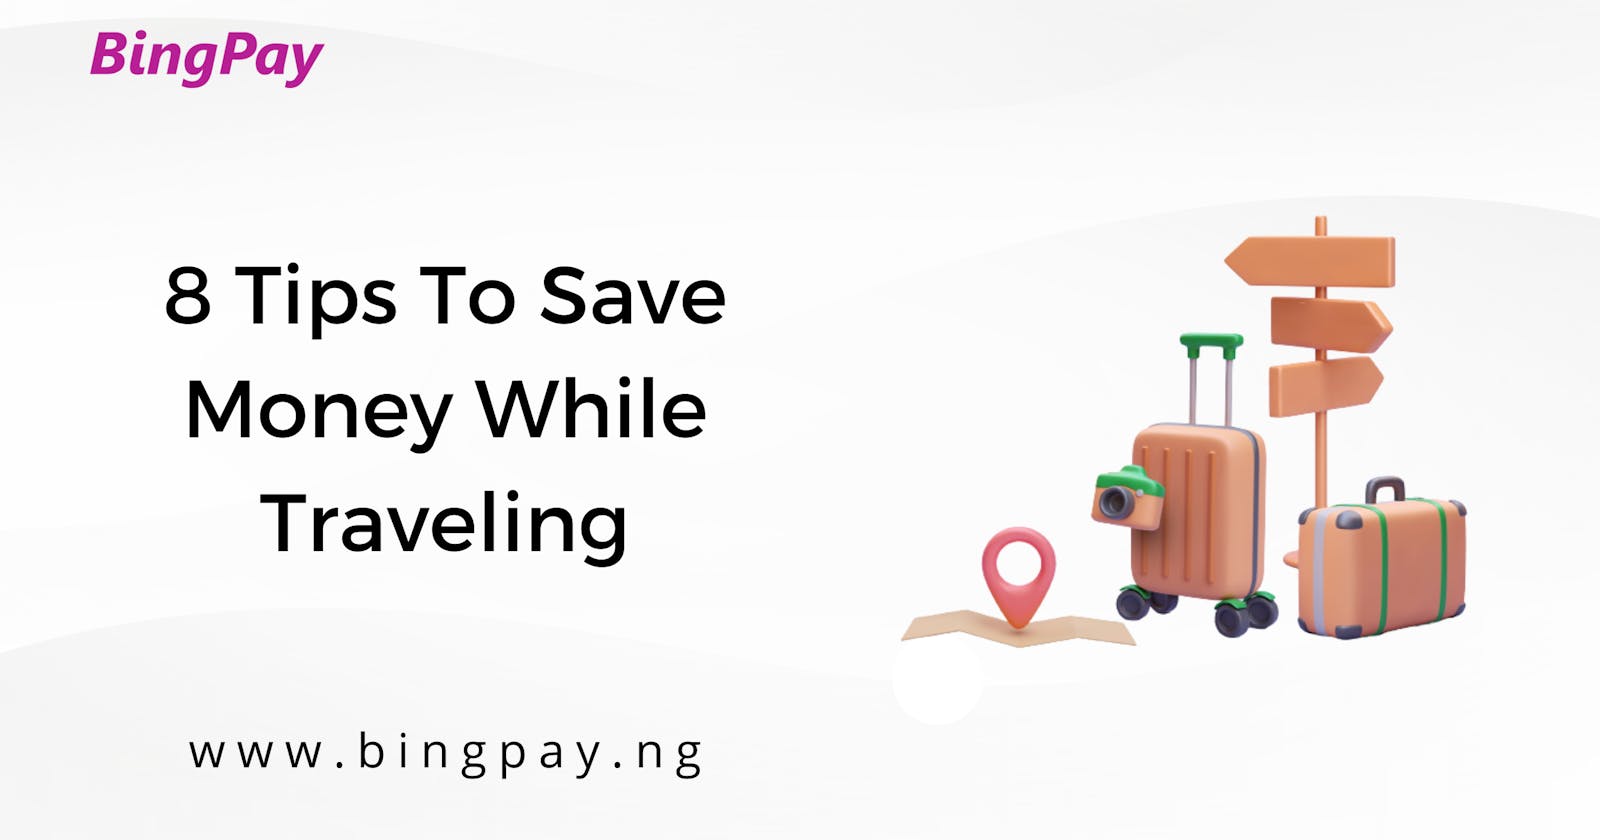 8 Tips To Save Money While Traveling